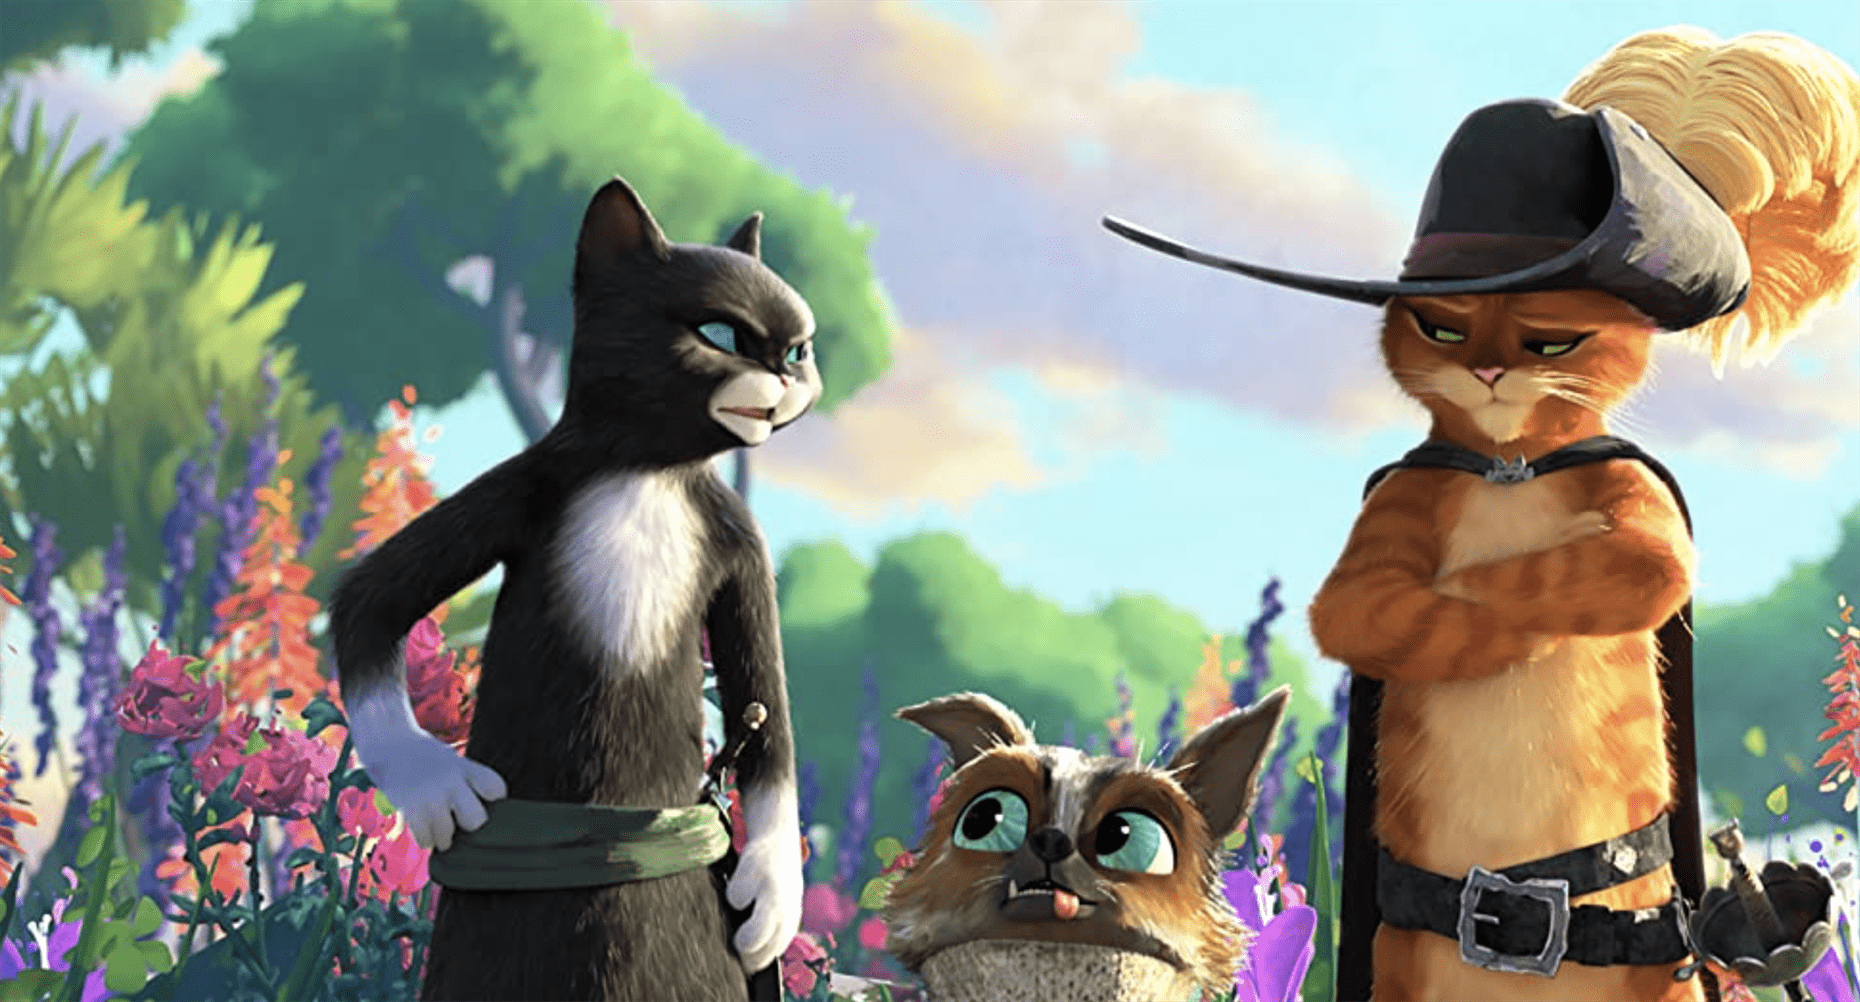 The film features an all-star cast, with Antonio Banderas and Salma Hayek reprising their roles from the original. Photo courtesy of DreamWorks Animation